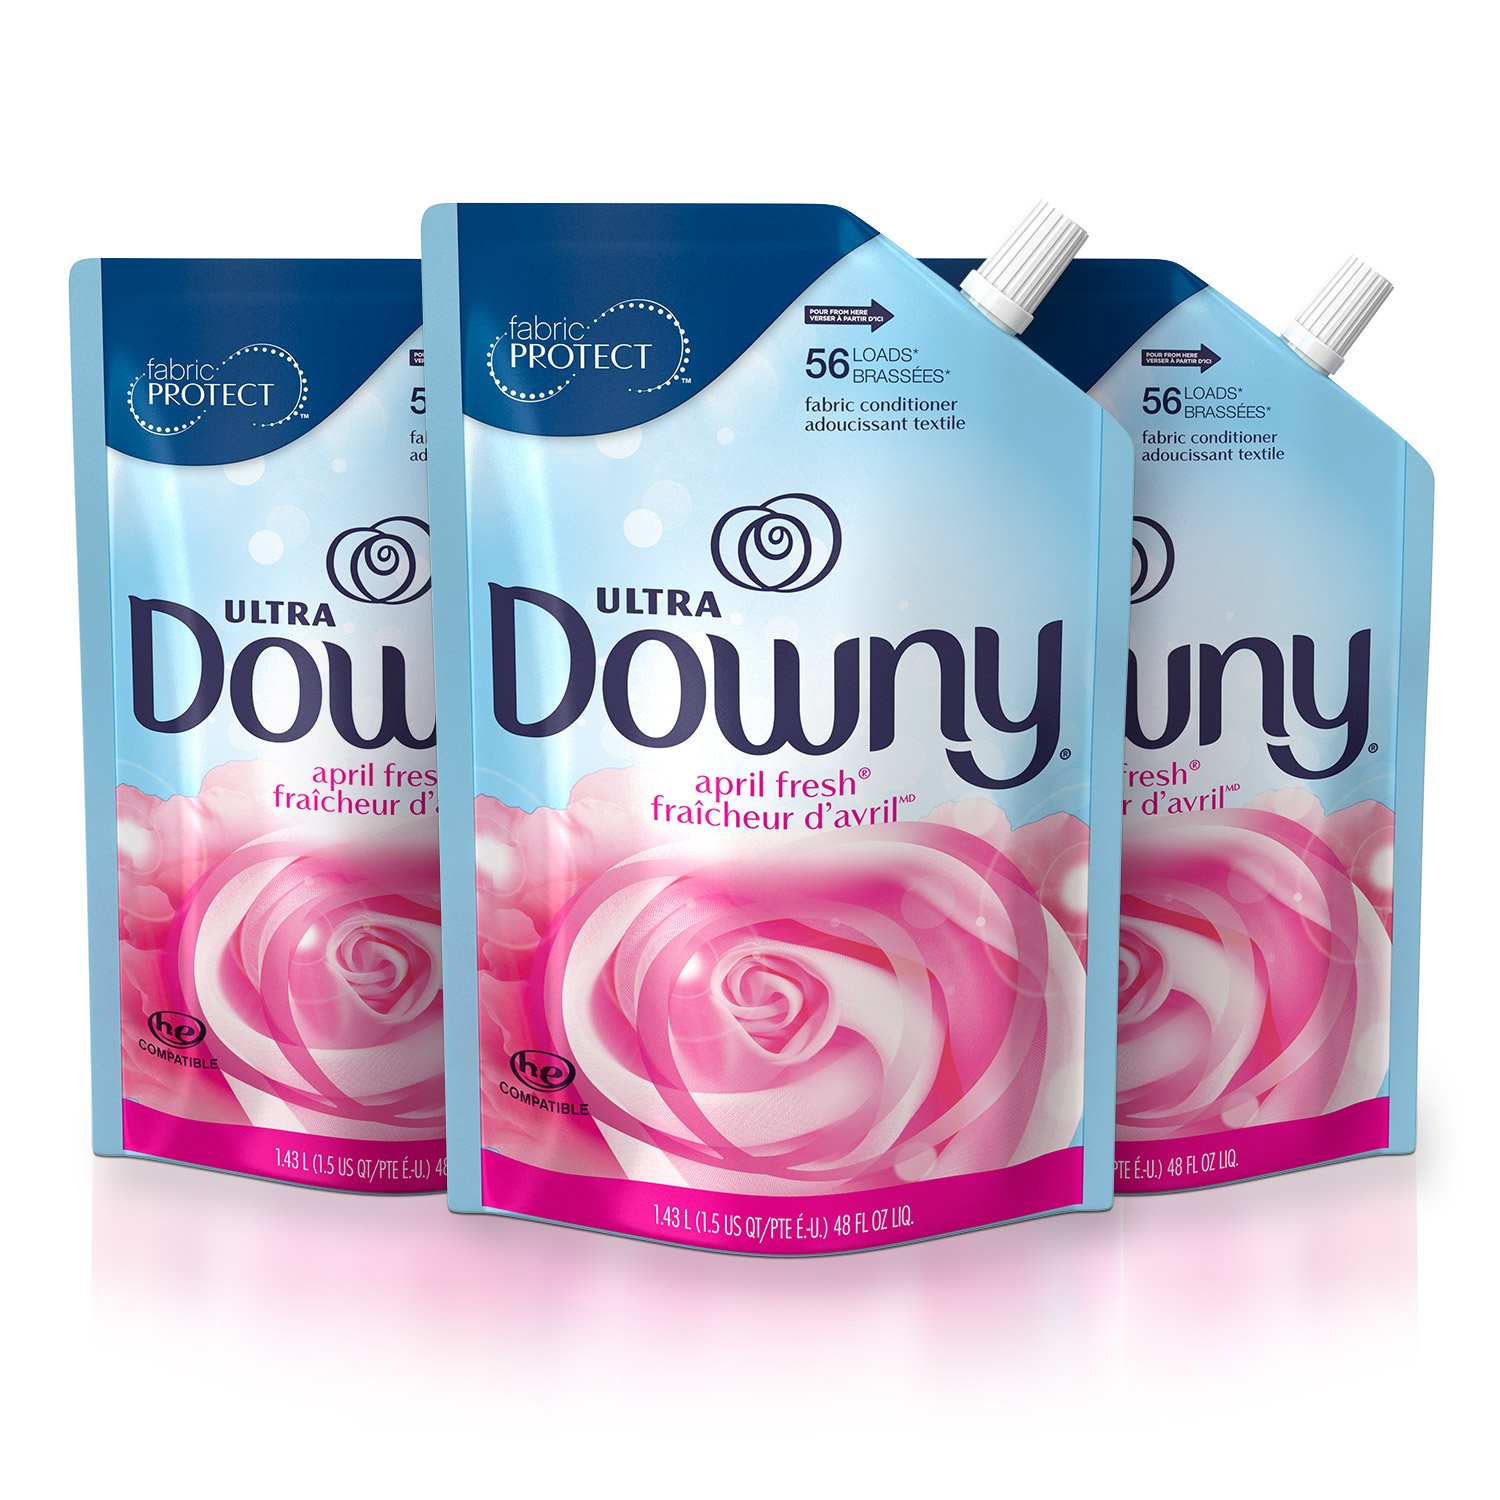 Book Cover Downy Ultra Laundry Fabric Softener Liquid, April Fresh Scent, 168 Total Loads (Pack of 3) 48 Fl Oz (Pack of 3) Liquid Laundry Fabric Softener, 168 Loads